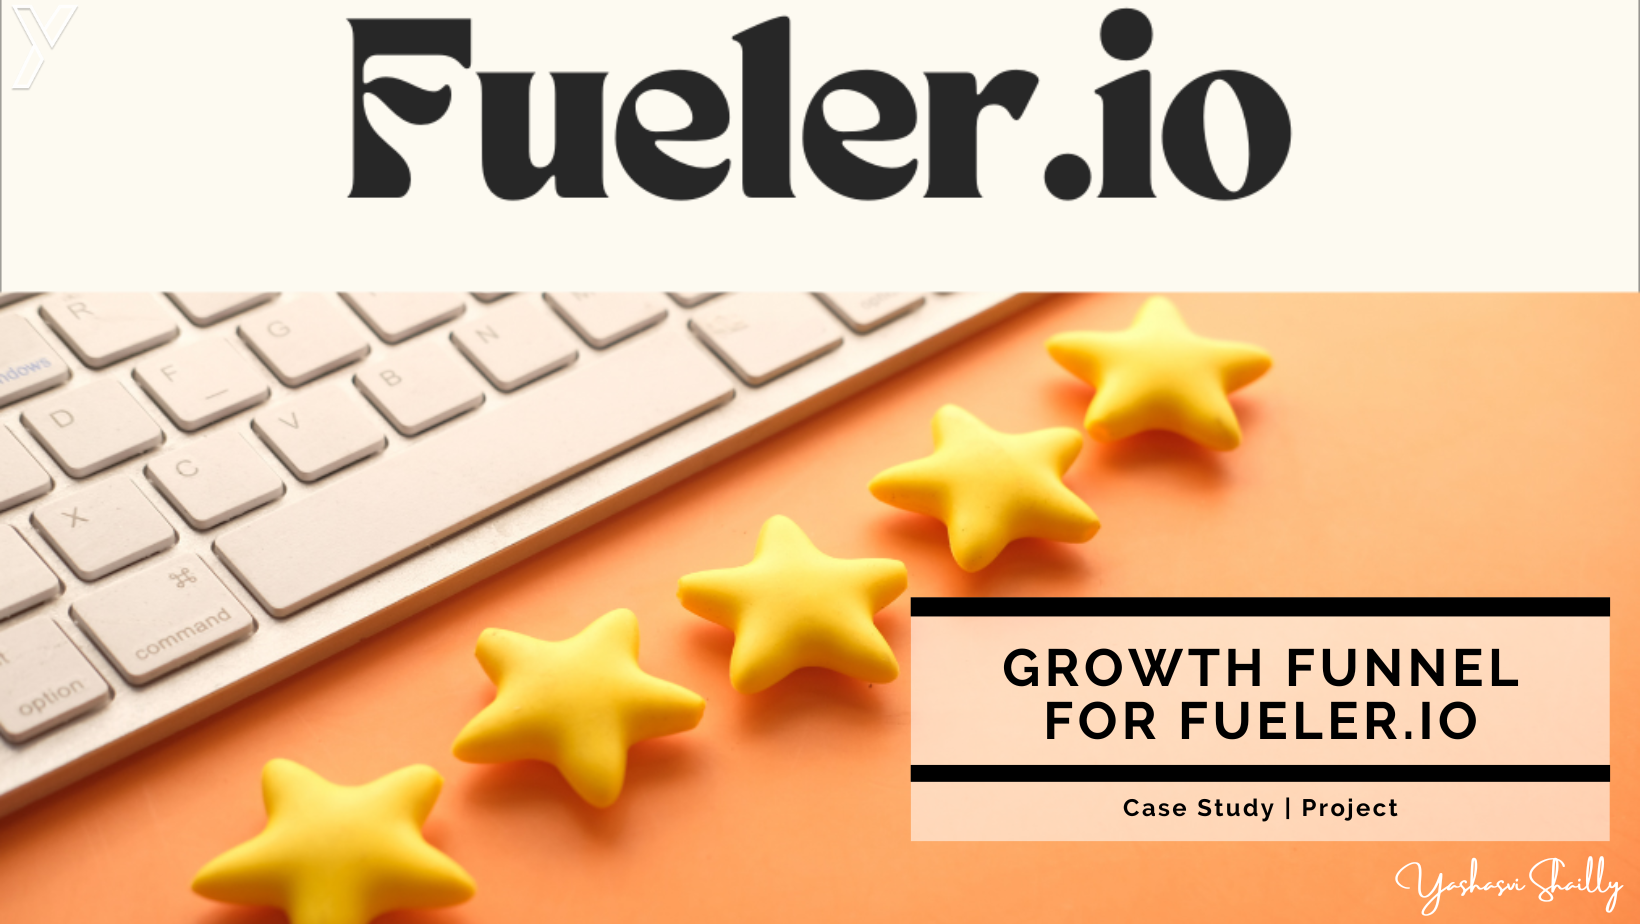 Growth Funnel for Fueler.io